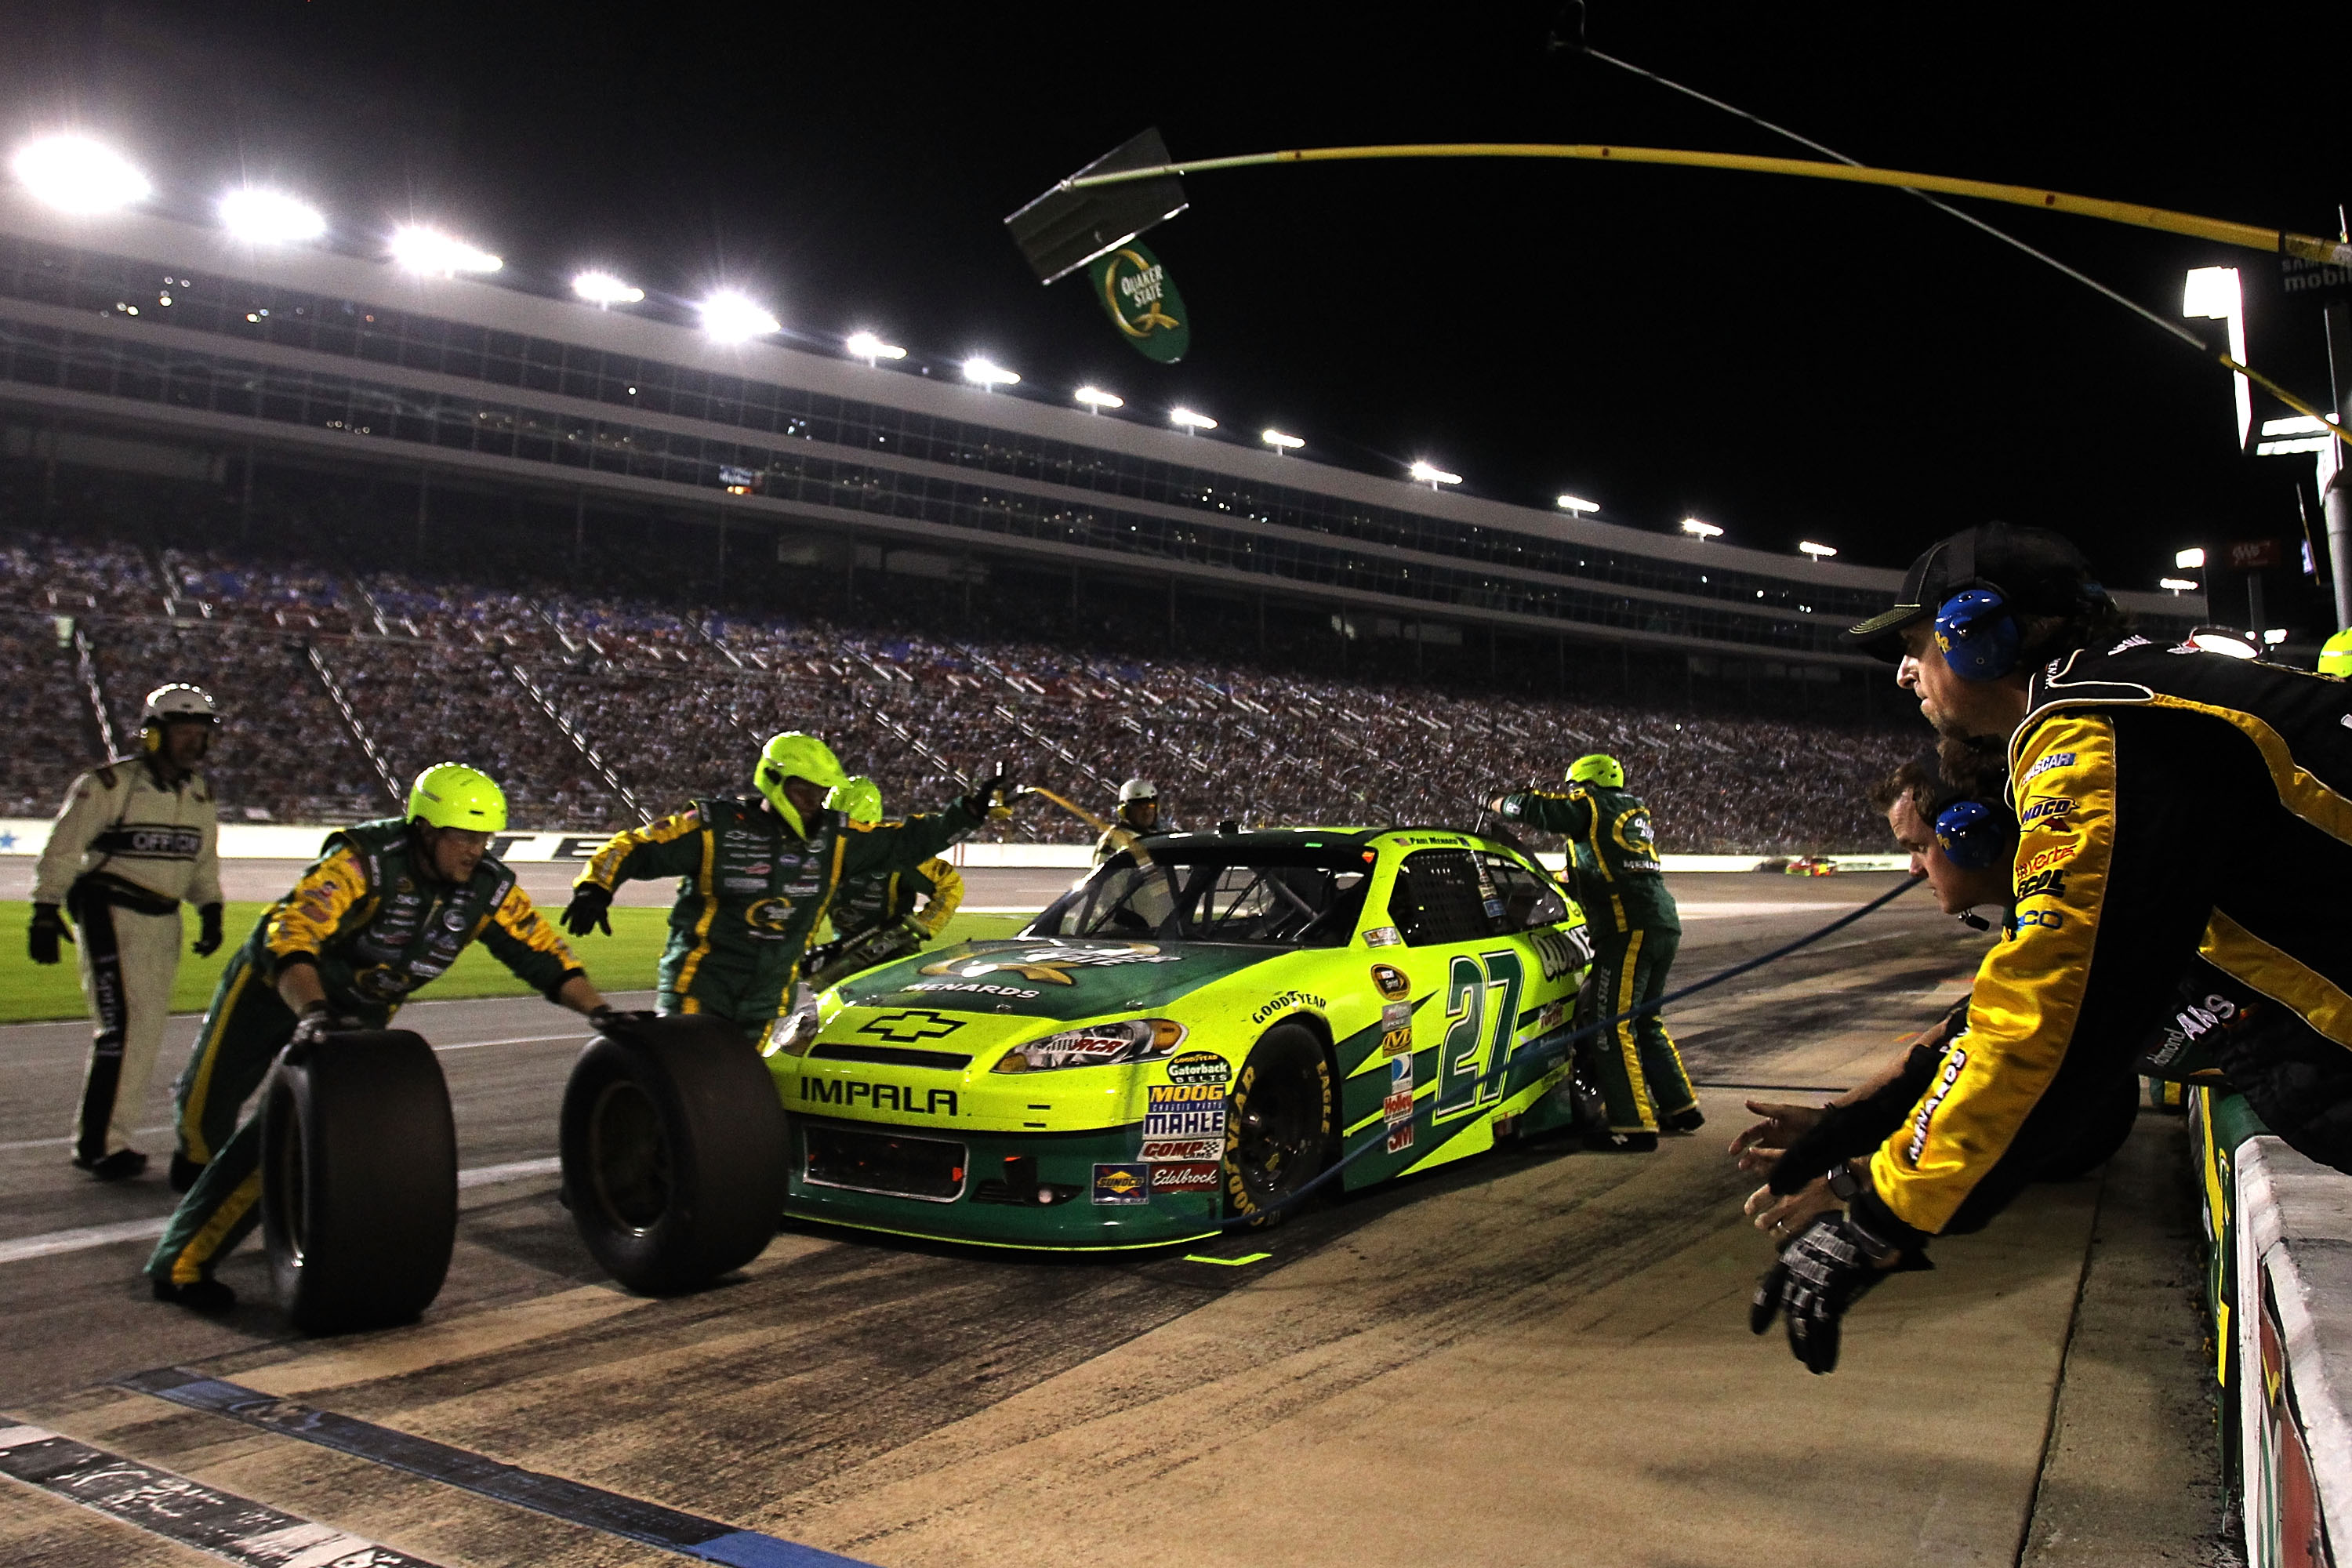 FORT WORTH, TX - APRIL 09:  Paul Menard pits the #27 Quaker State/Menards Chevrolet during the NASCAR Sprint Cup Series Samsung Mobile 500 at Texas Motor Speedway on April 9, 2011 in Fort Worth, Texas.  (Photo by Jason Smith/Getty Images for NASCAR)